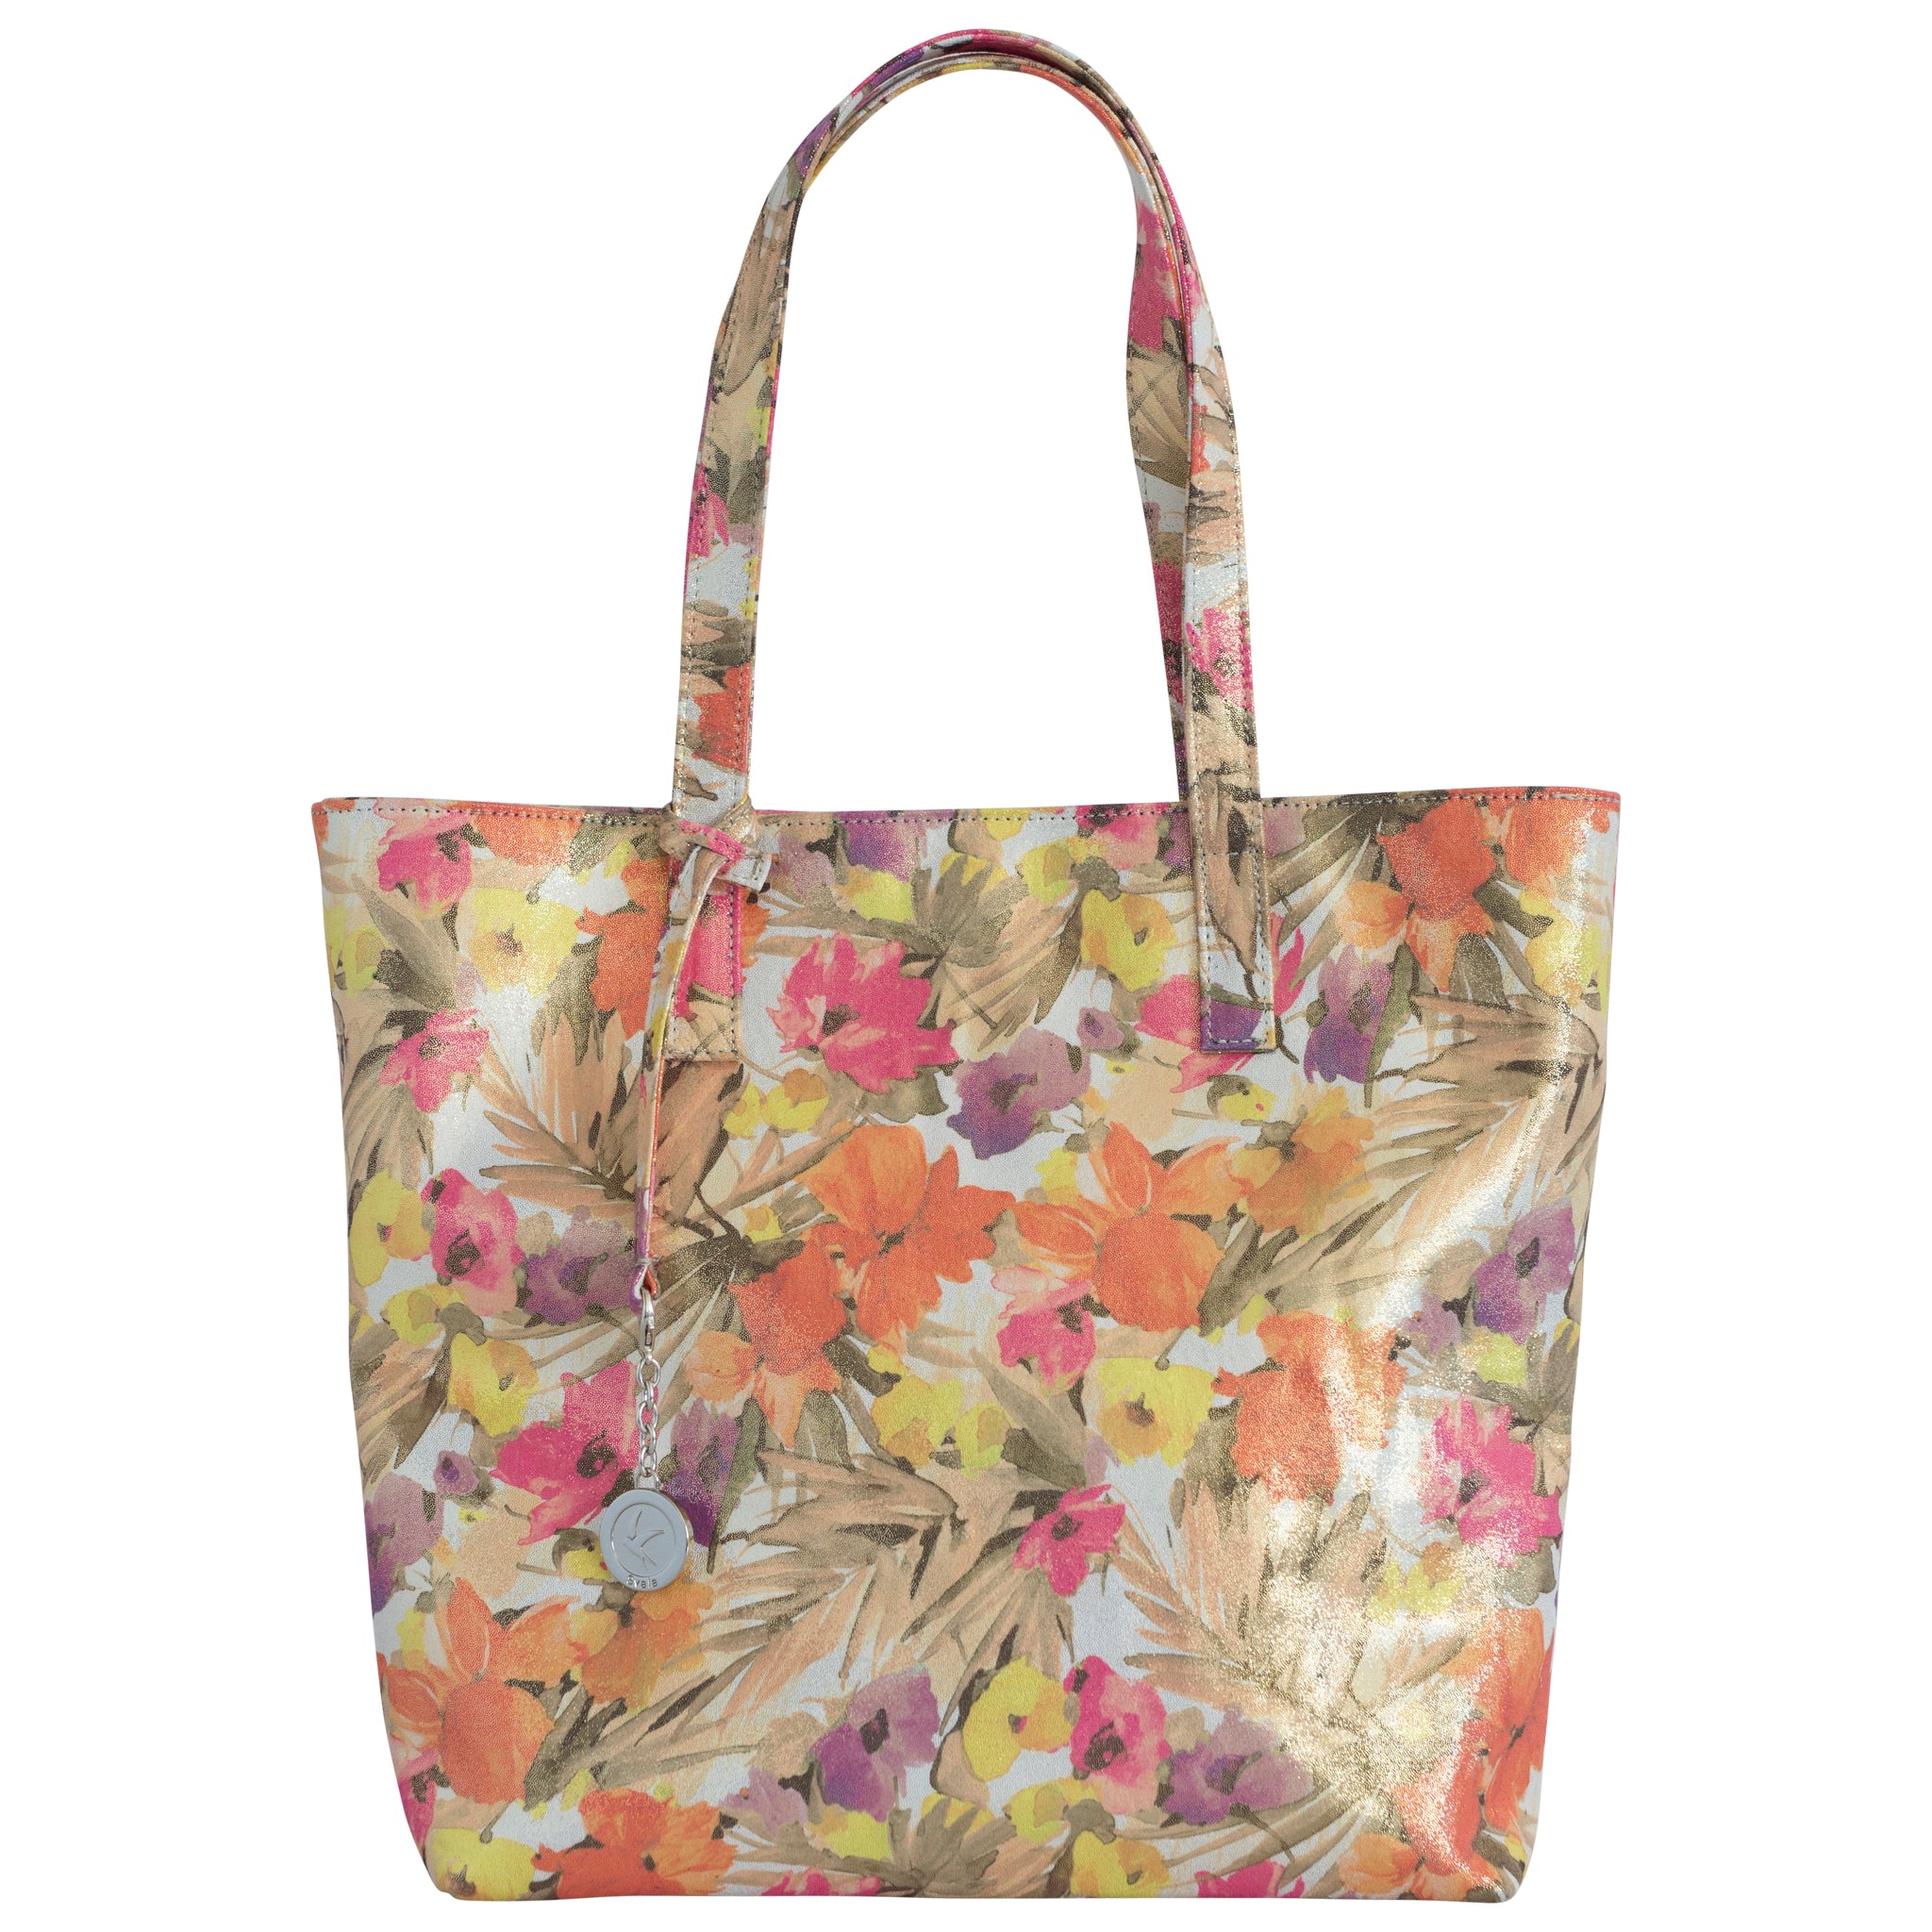 Svala Women's Simma Tote - Floral In Black/gray